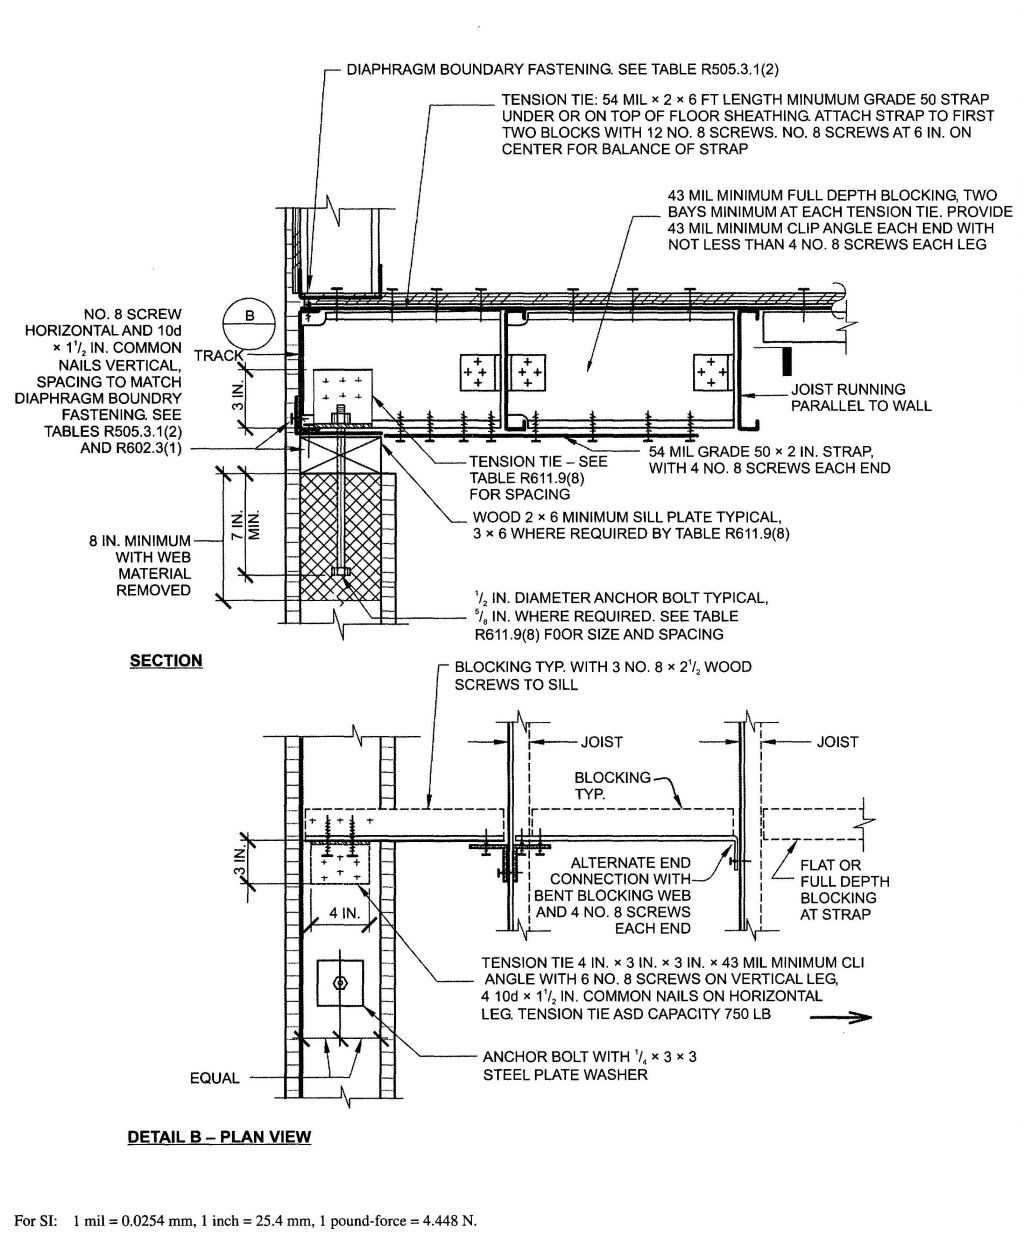 FIGURE R611.9(8)COLD-FORMED STEEL FLOOR TO TOP OF CONCRETE WALL, FRAMING PARALLEL